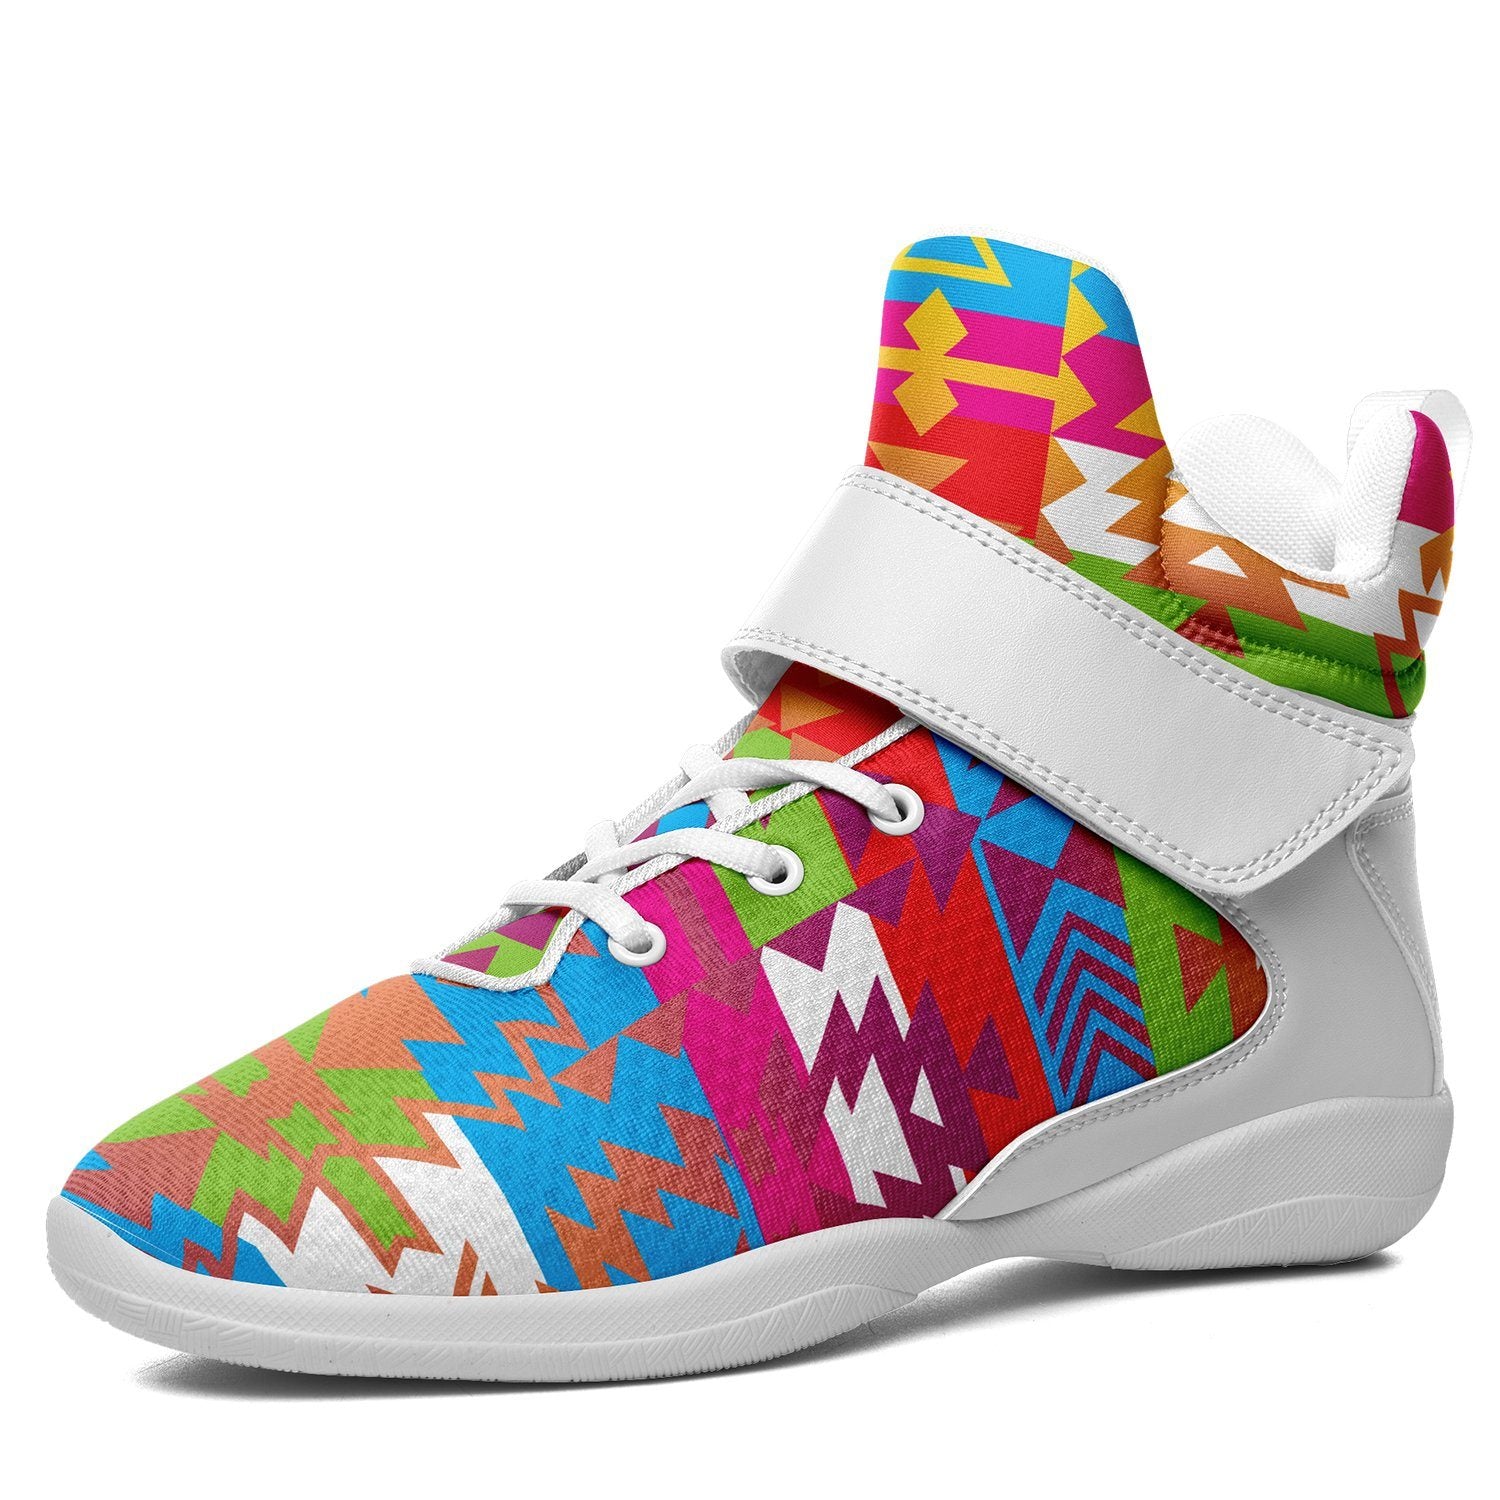 Grand Entry Ipottaa Basketball / Sport High Top Shoes 49 Dzine US Women 4.5 / US Youth 3.5 / EUR 35 White Sole with White Strap 